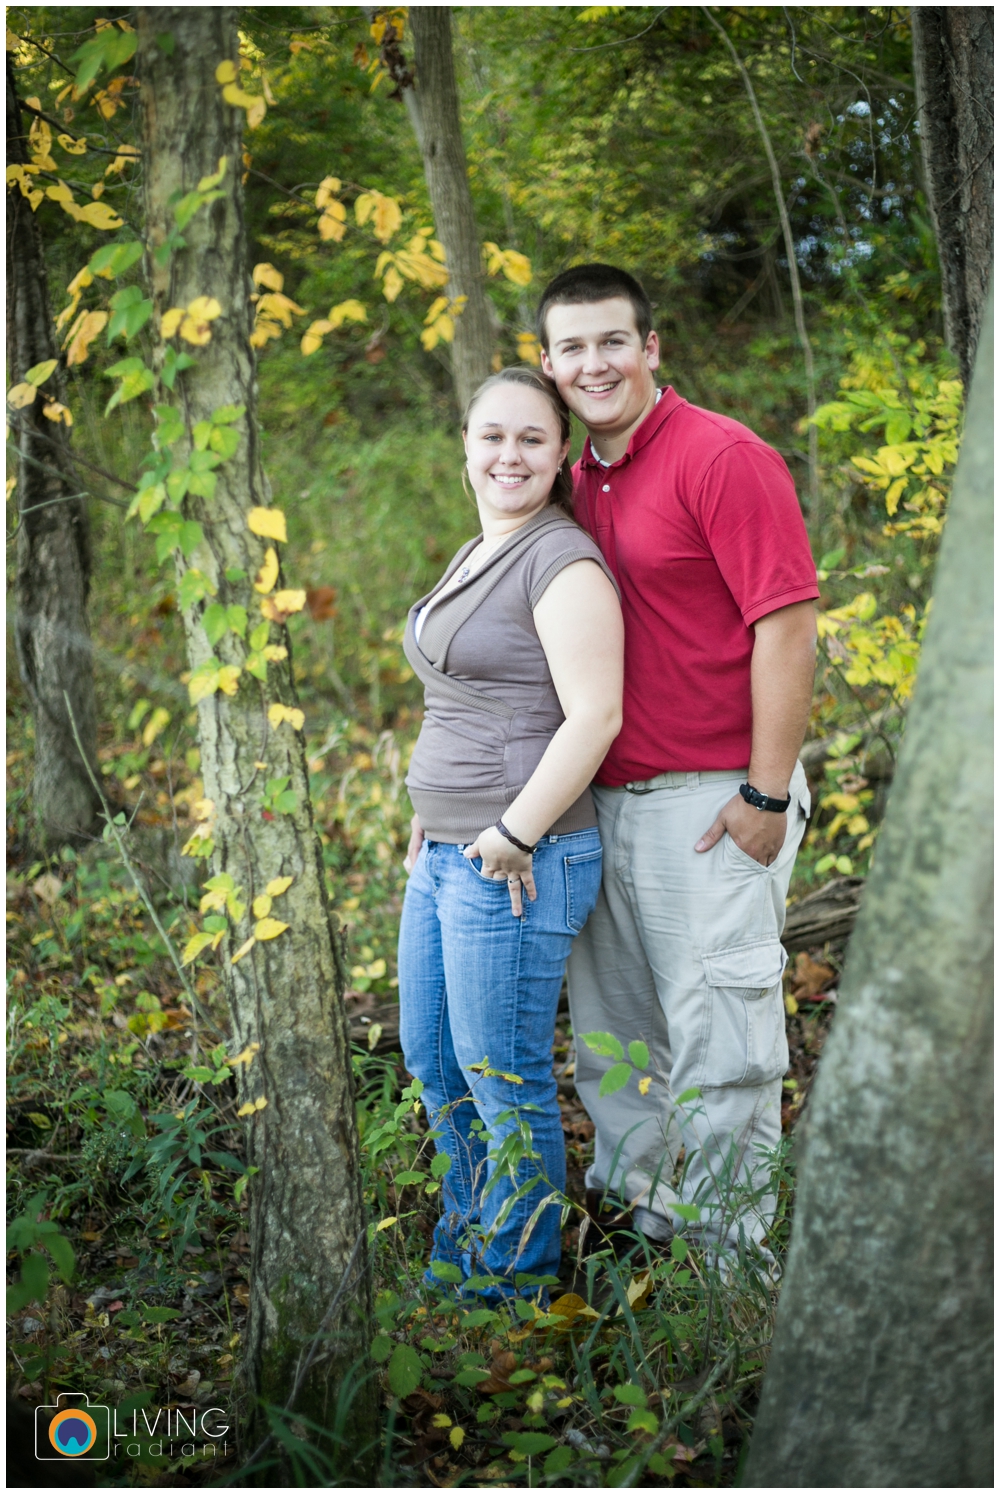 holley-ray-engaged-outdoor-engagement-session-woods-water-state-park-living-radiant-photography_0007.jpg